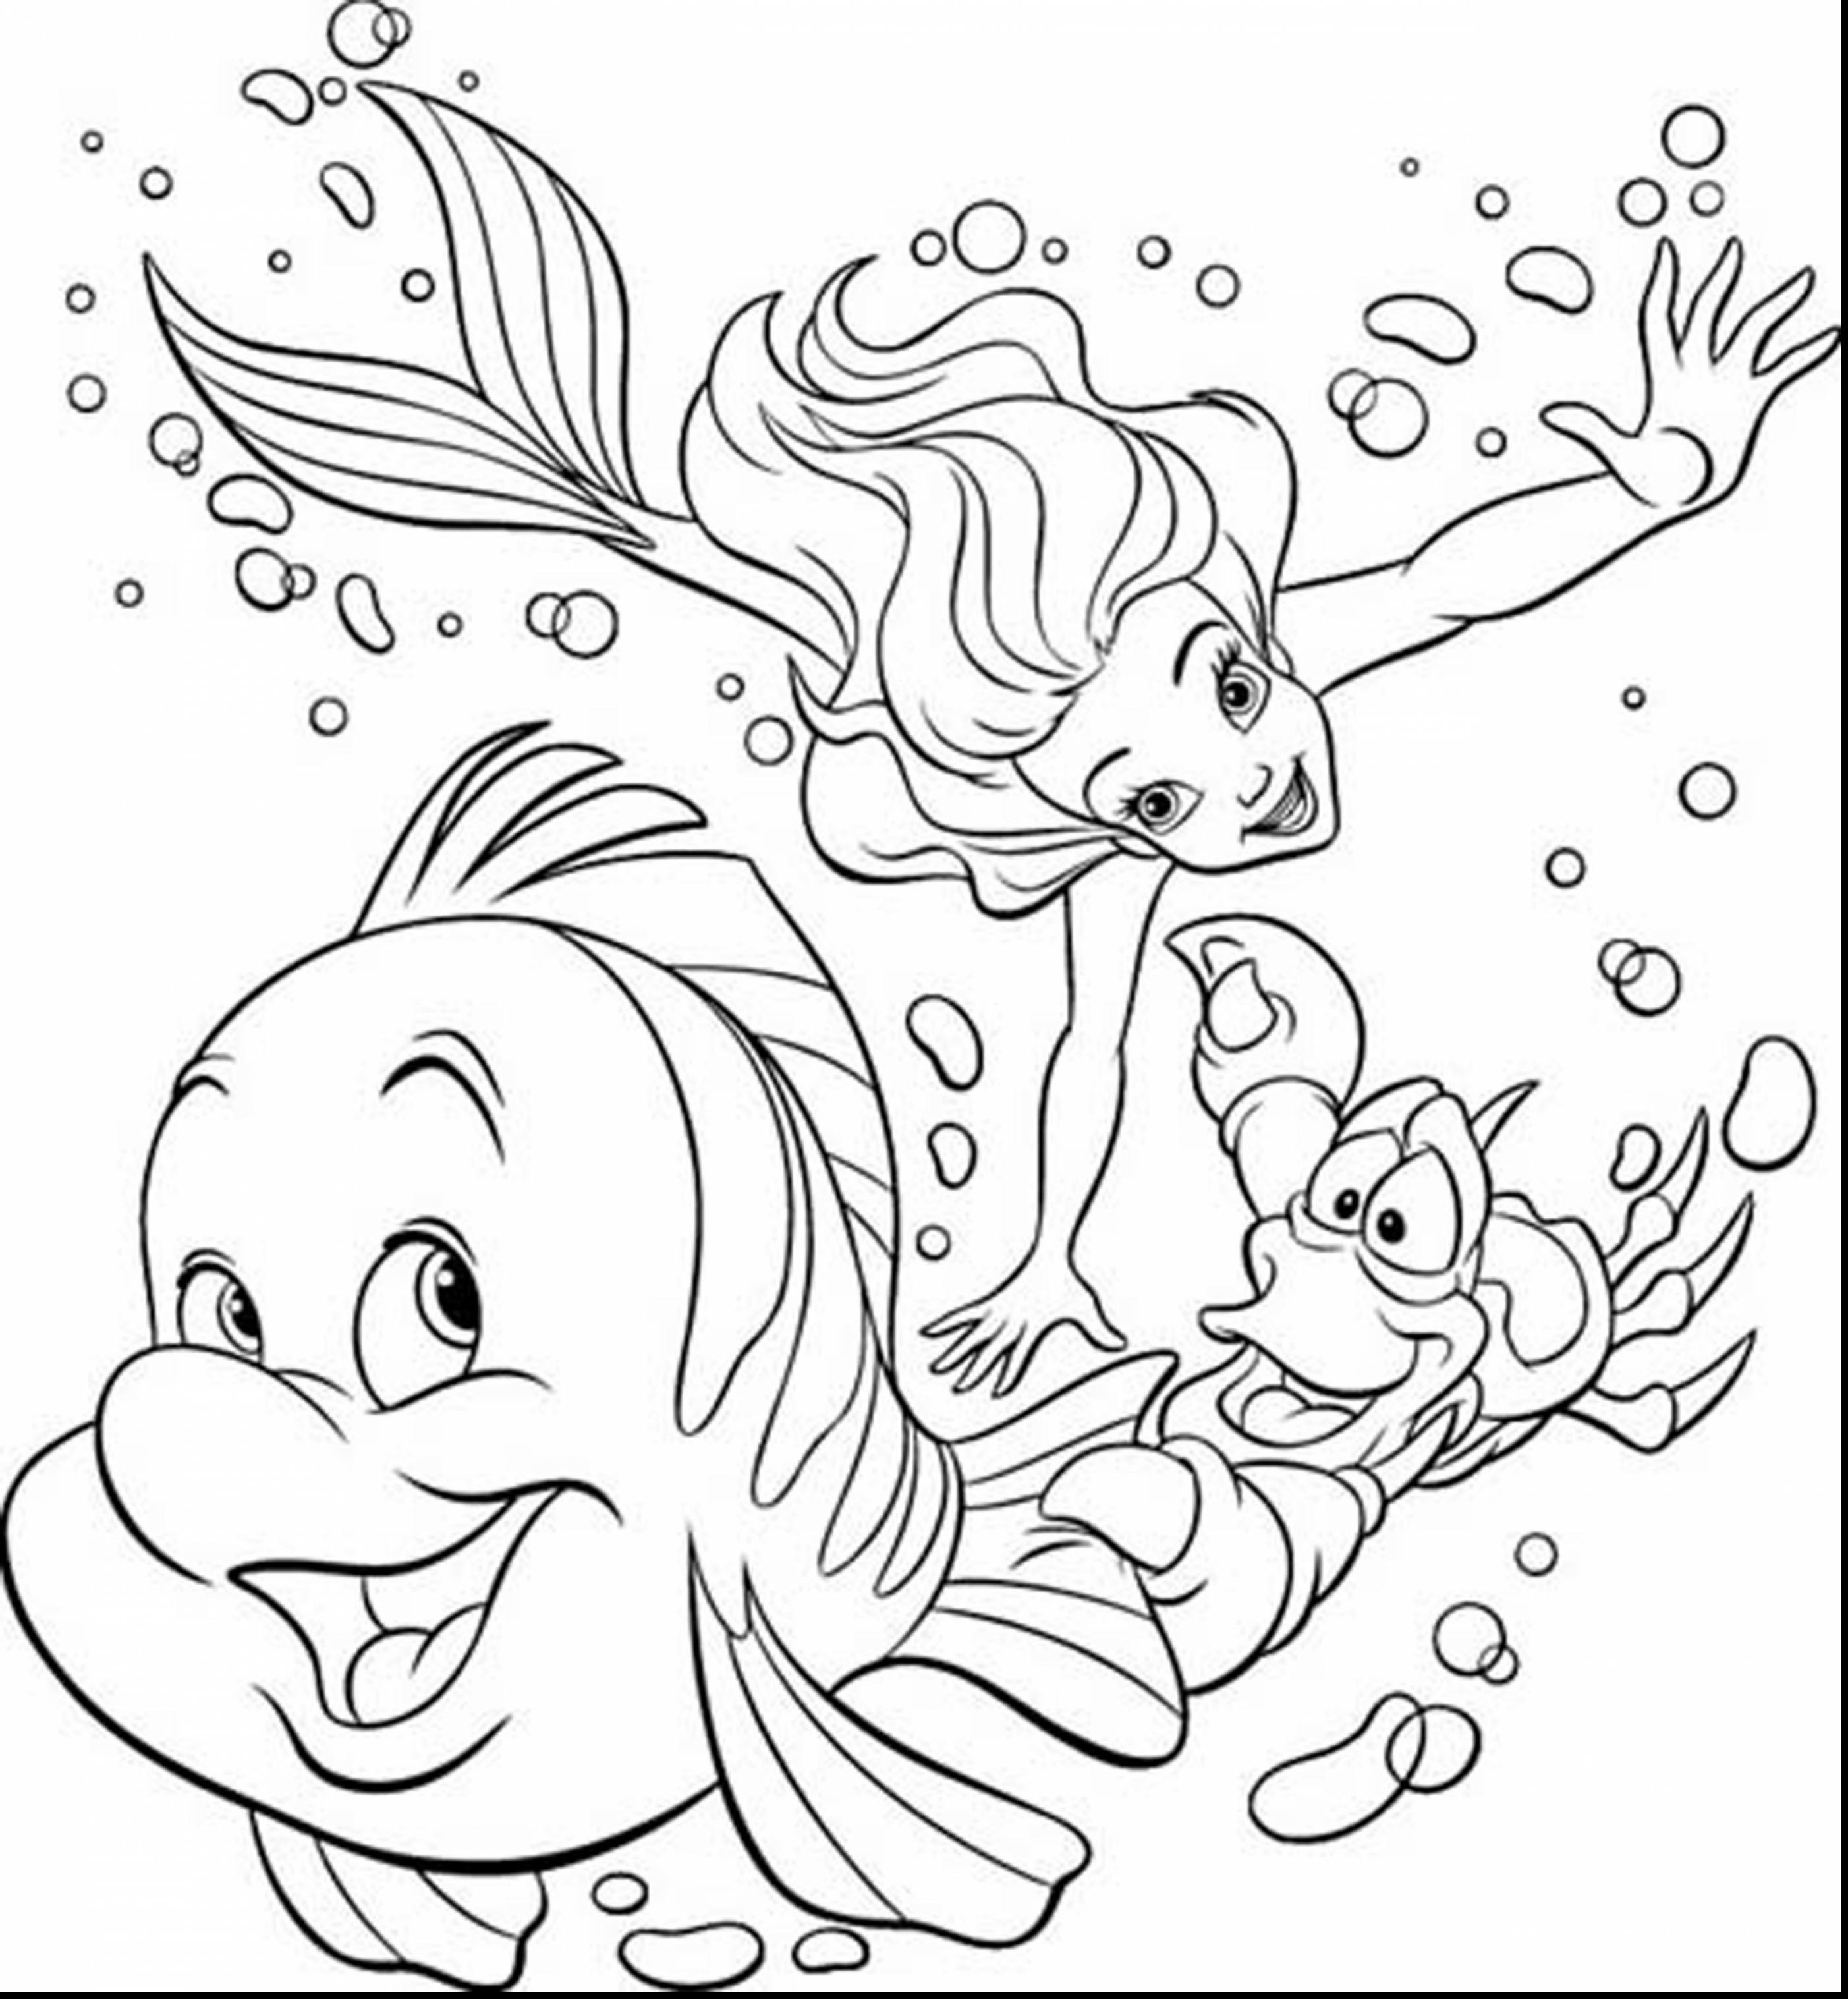 Easy Princess Coloring Pages at GetDrawings | Free download